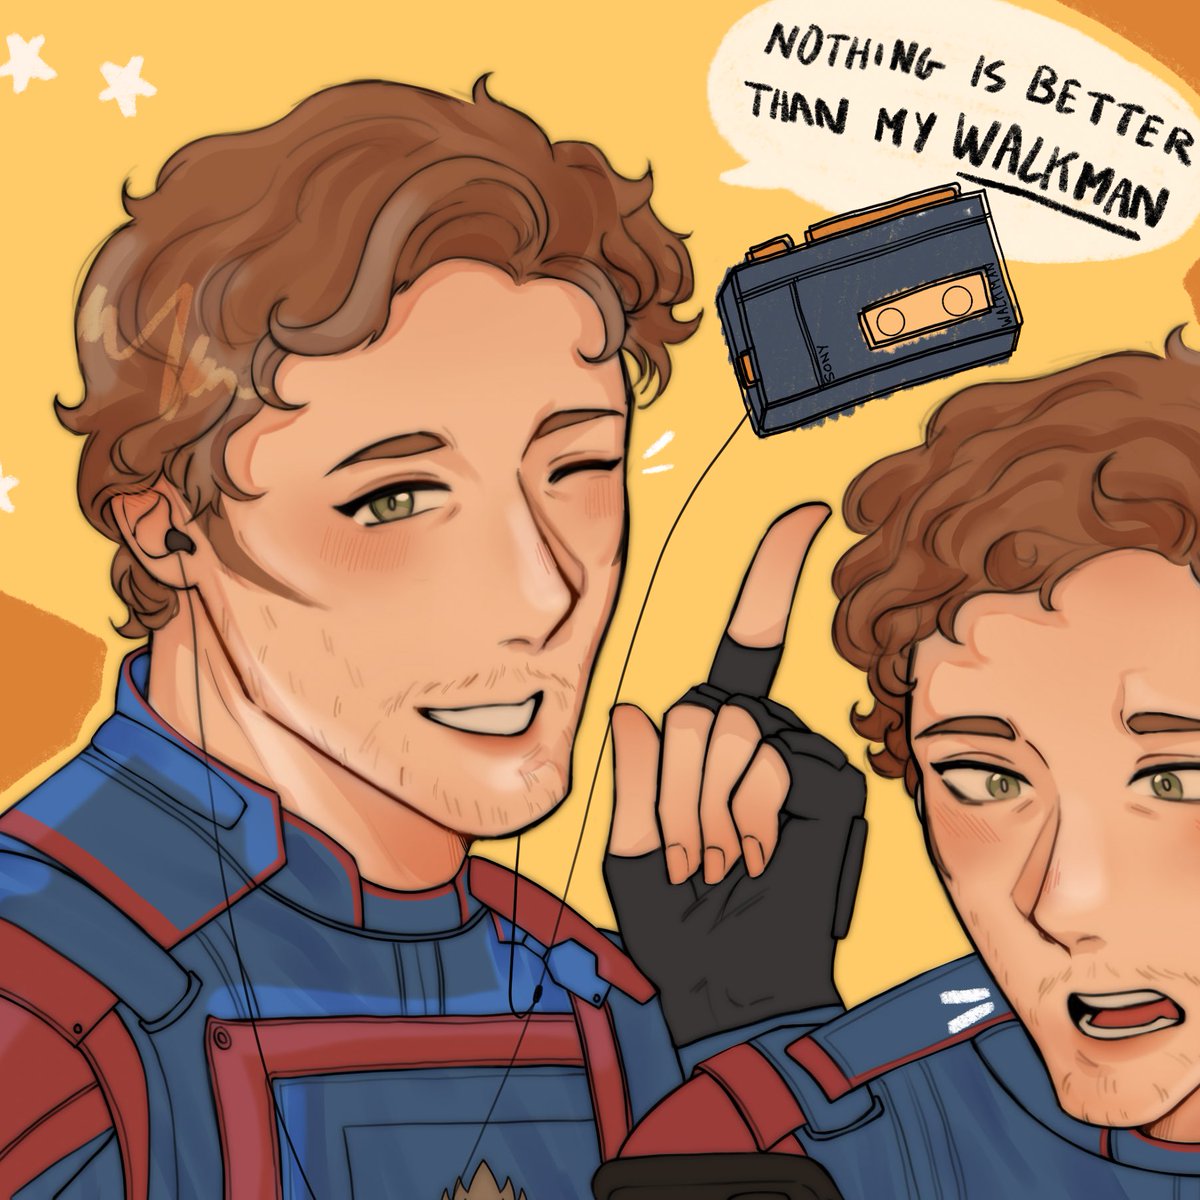 peter quill discover spotify and airpods 

#GotgVol3 #GuardiansOfTheGalaxy #GuardianesdelaGalaxiaVol3 #Starlord